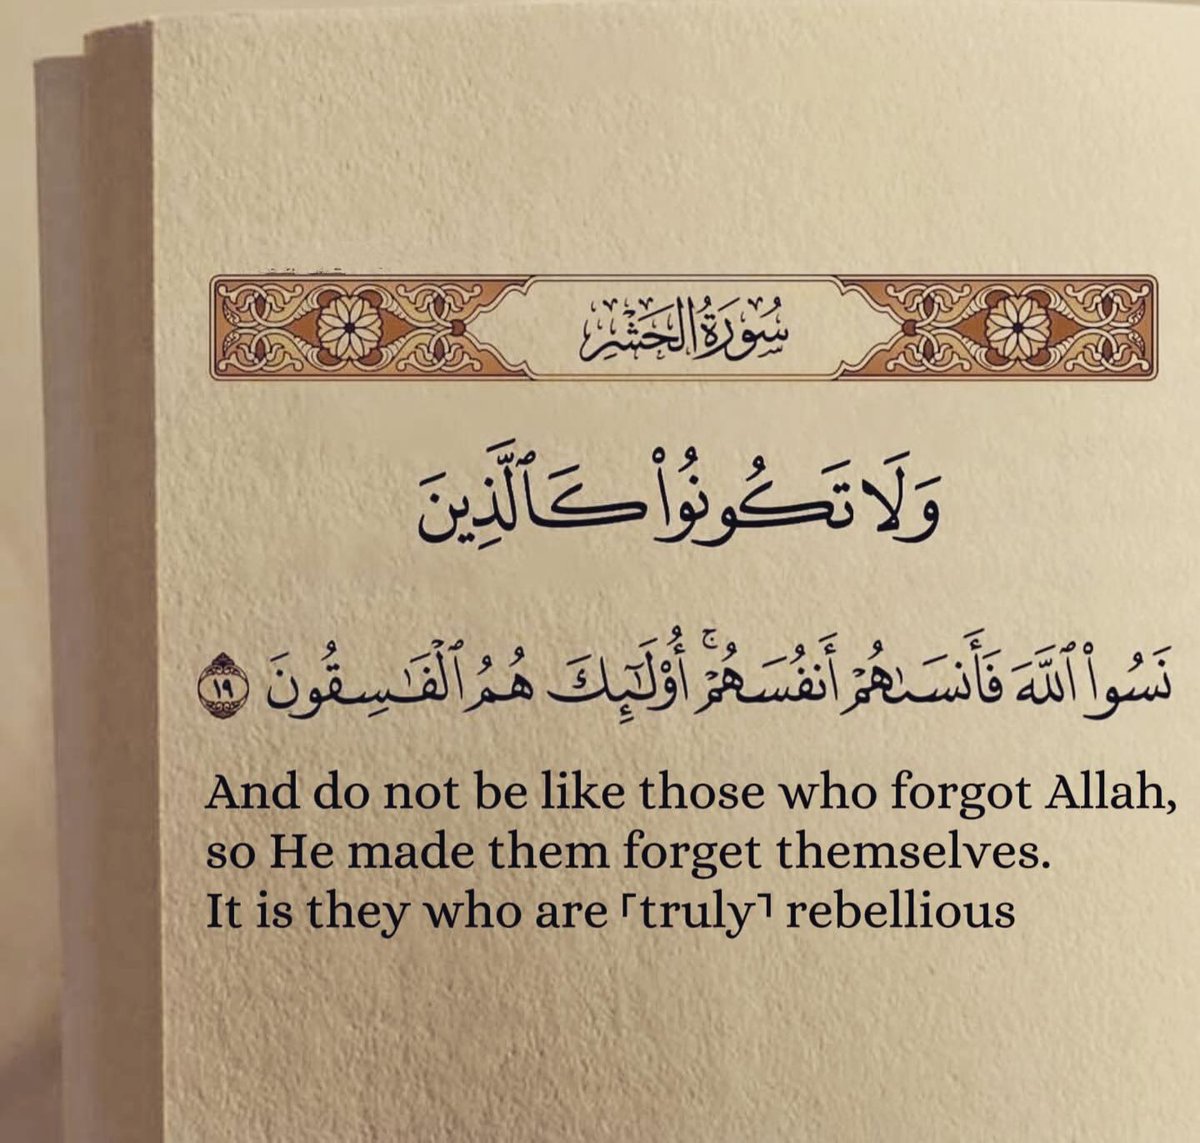 “And do not be like those who forgot Allah, so He made them forget themselves. It is they who are ˹truly˺ rebellious.” — Al Qur’aan [59:19]